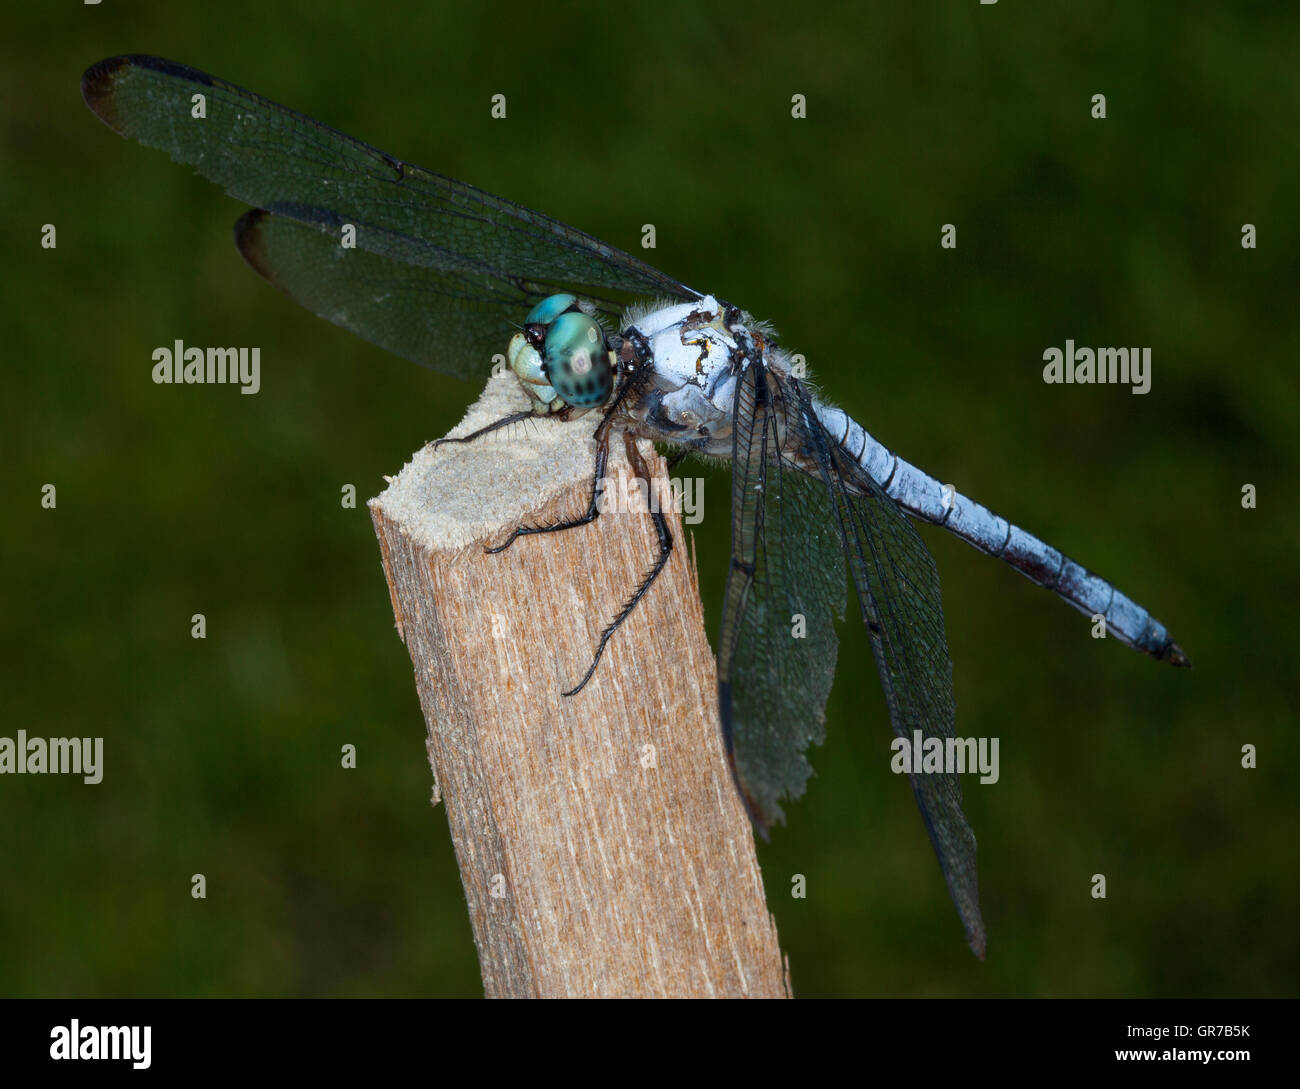 Closeup of a blue dragonfly that is on a stick Stock Photo